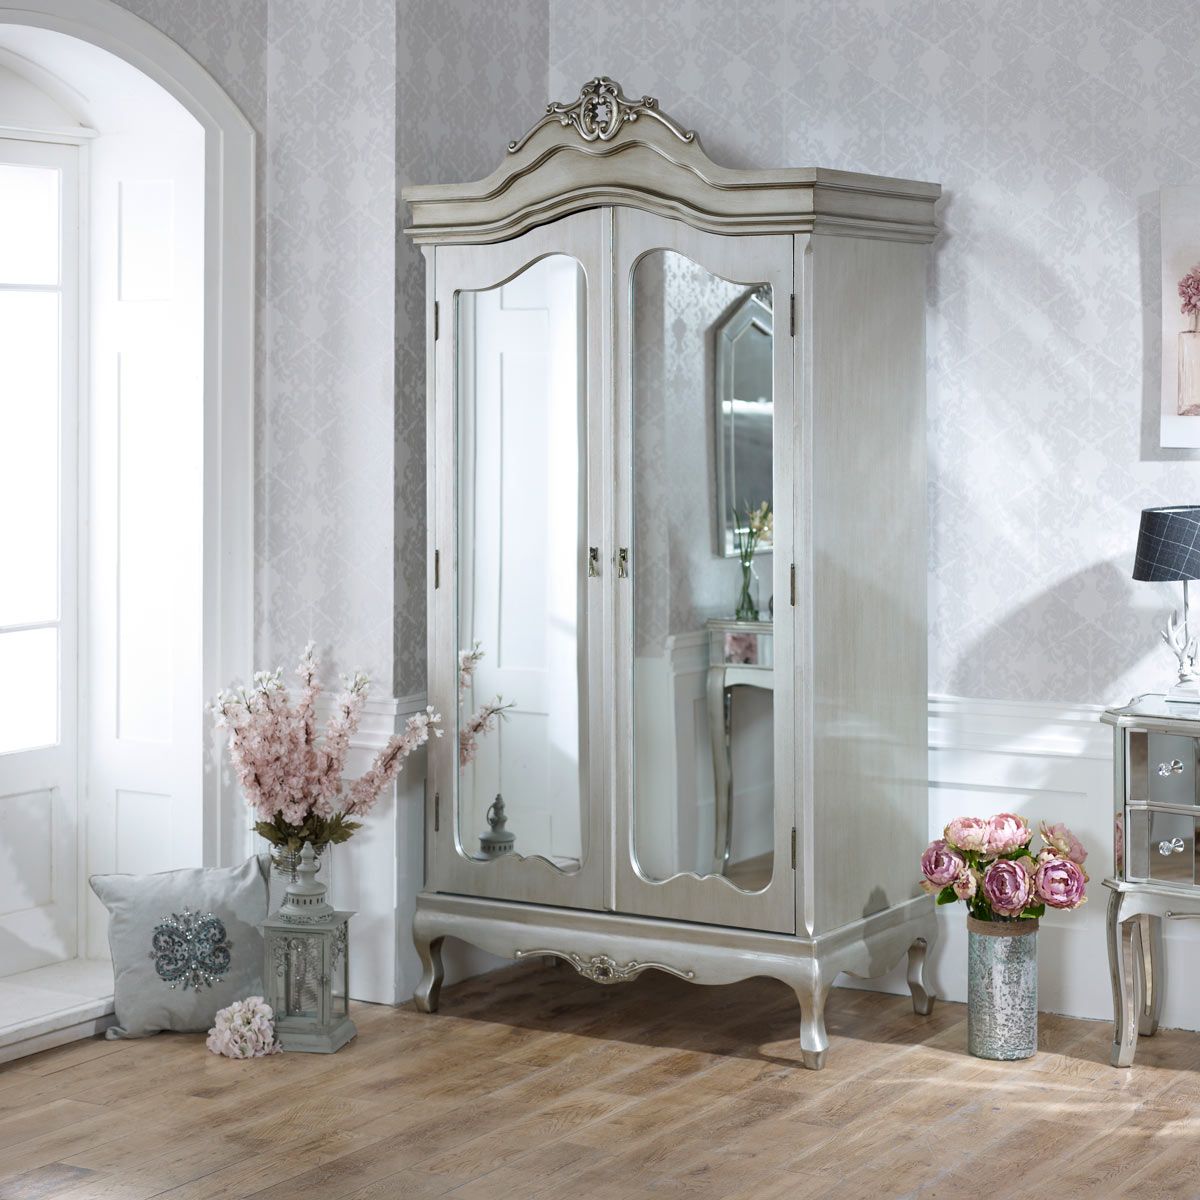 Tiffany Range – Mirrored Double Wardrobe | Flora Furniture For Double Wardrobes With Mirror (View 4 of 15)